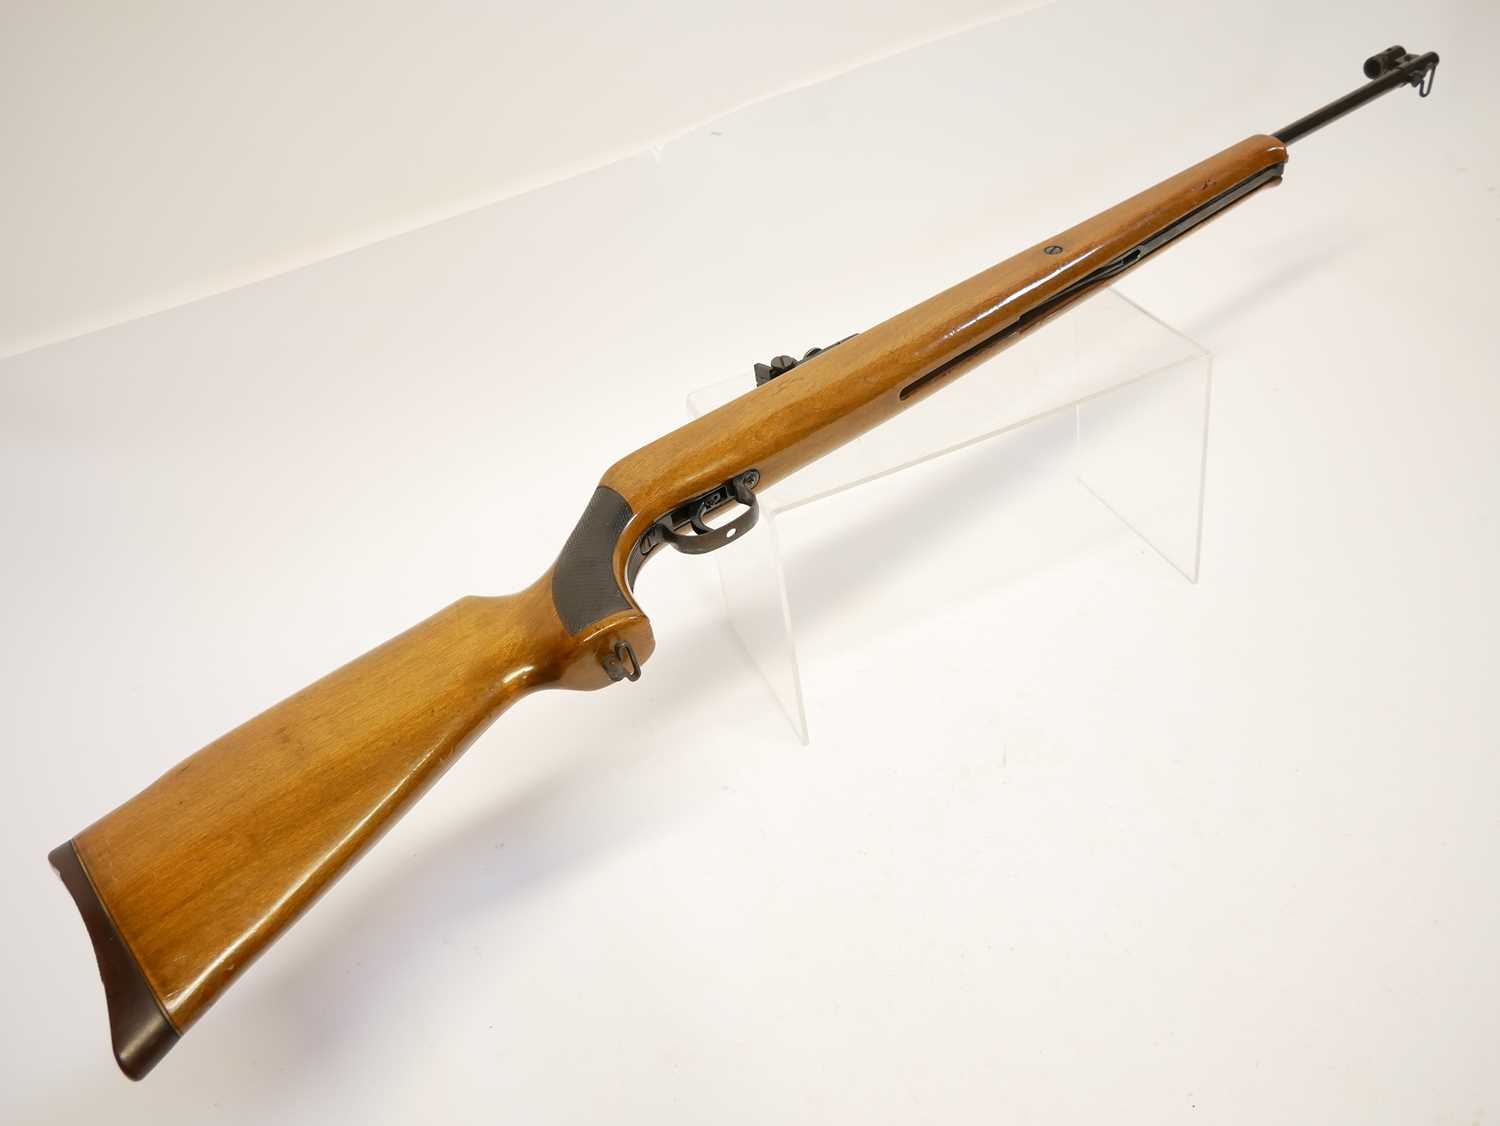 Original model 50 .22 air rifle, serial number 71371623, 18.5 inch barrel with tunnel front sight - Image 9 of 13